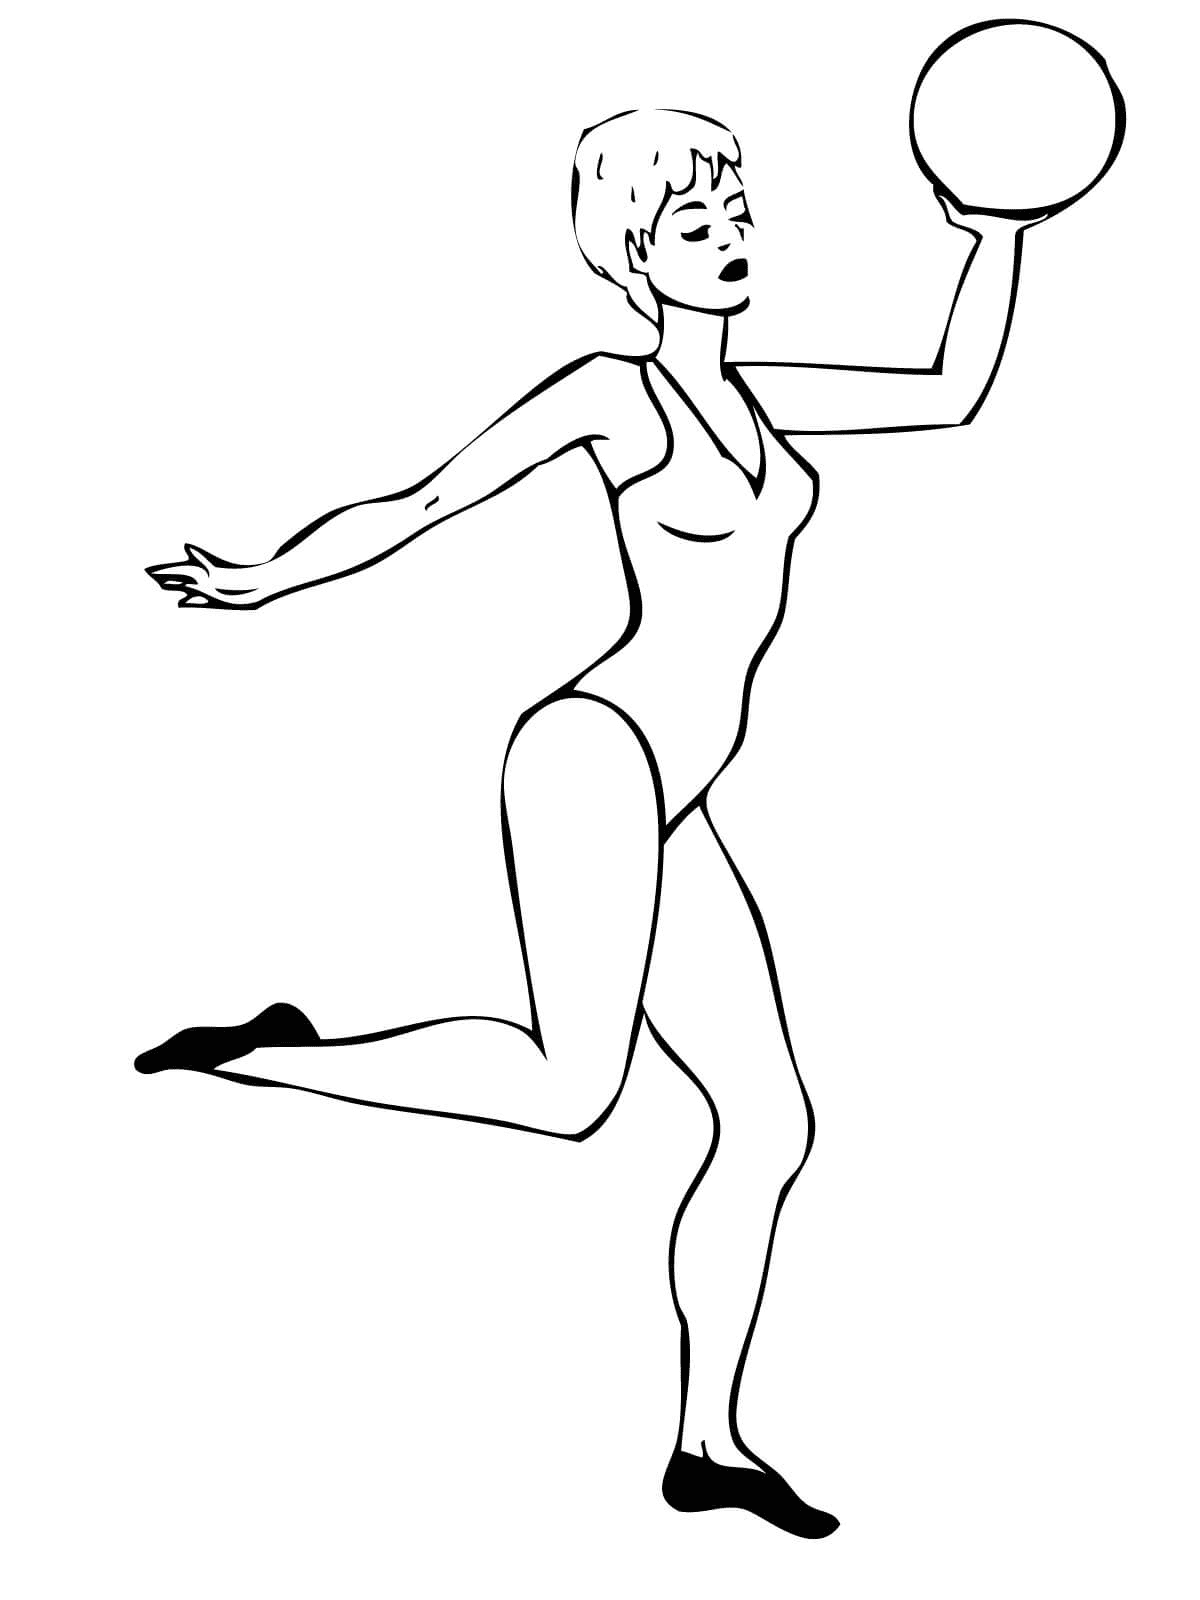 Rhythmic Gymnast Perfoming with a Ball Coloring Page